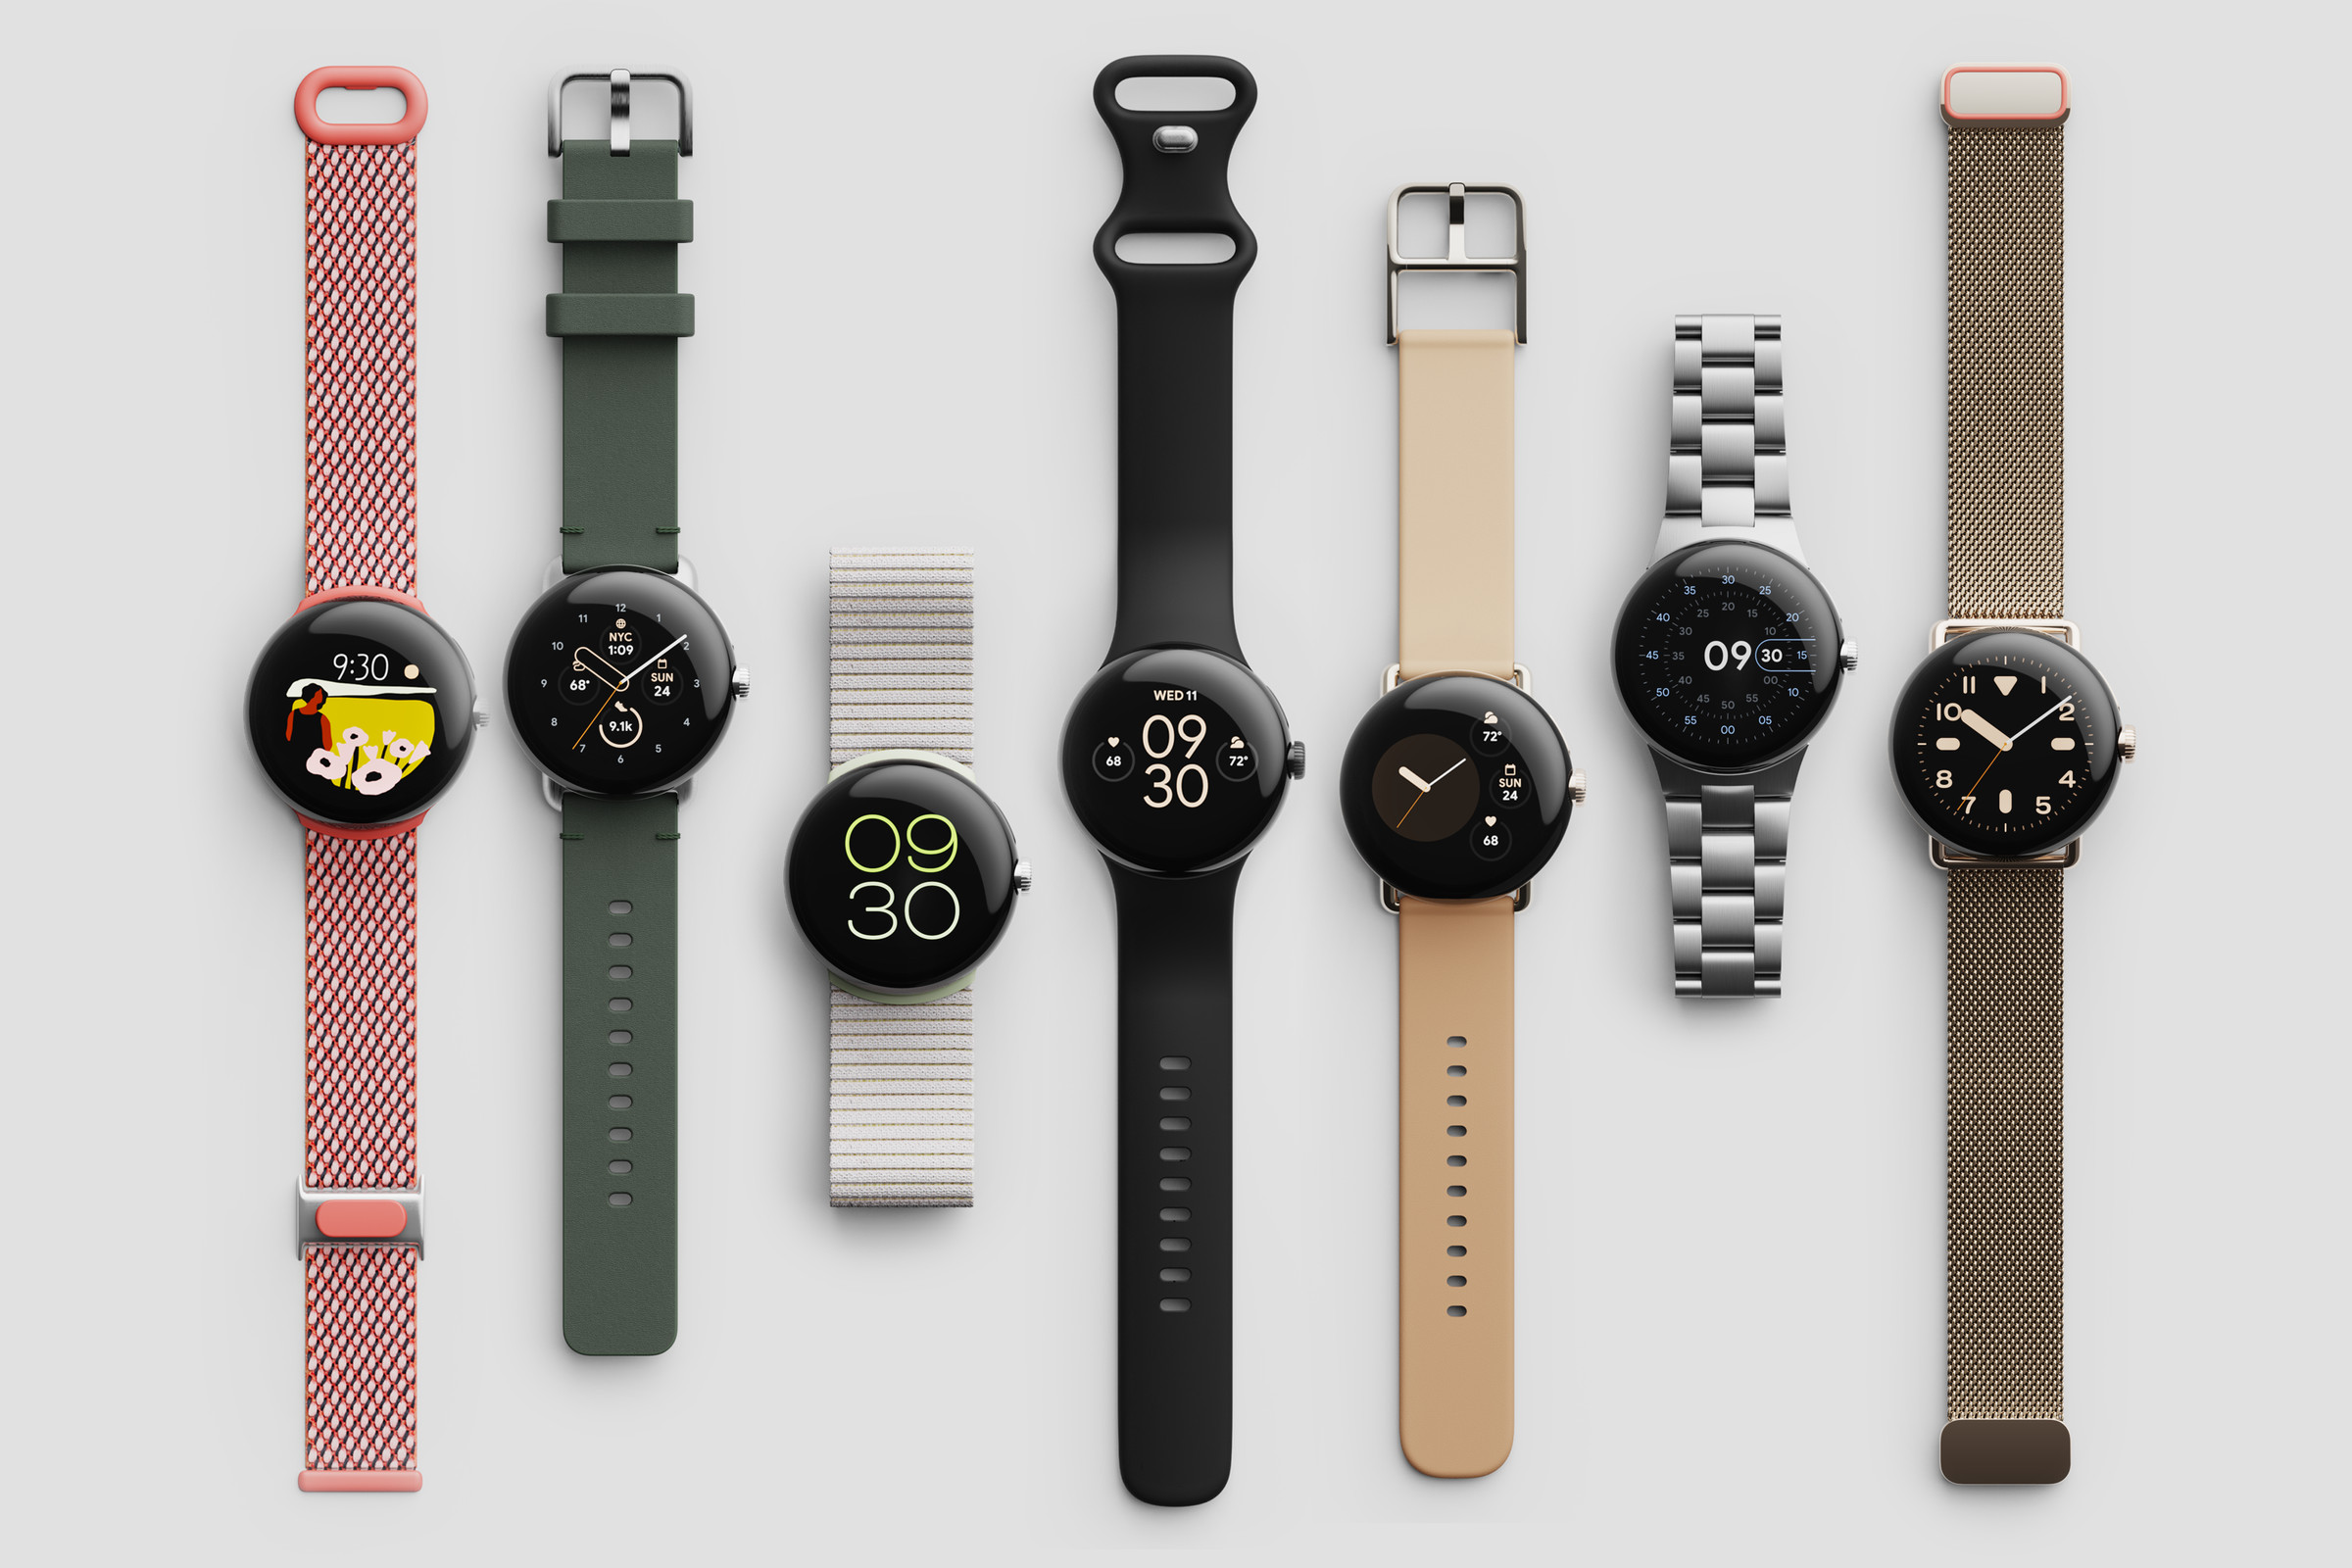 All the varieties of of Pixel Watch cases and bands side by side